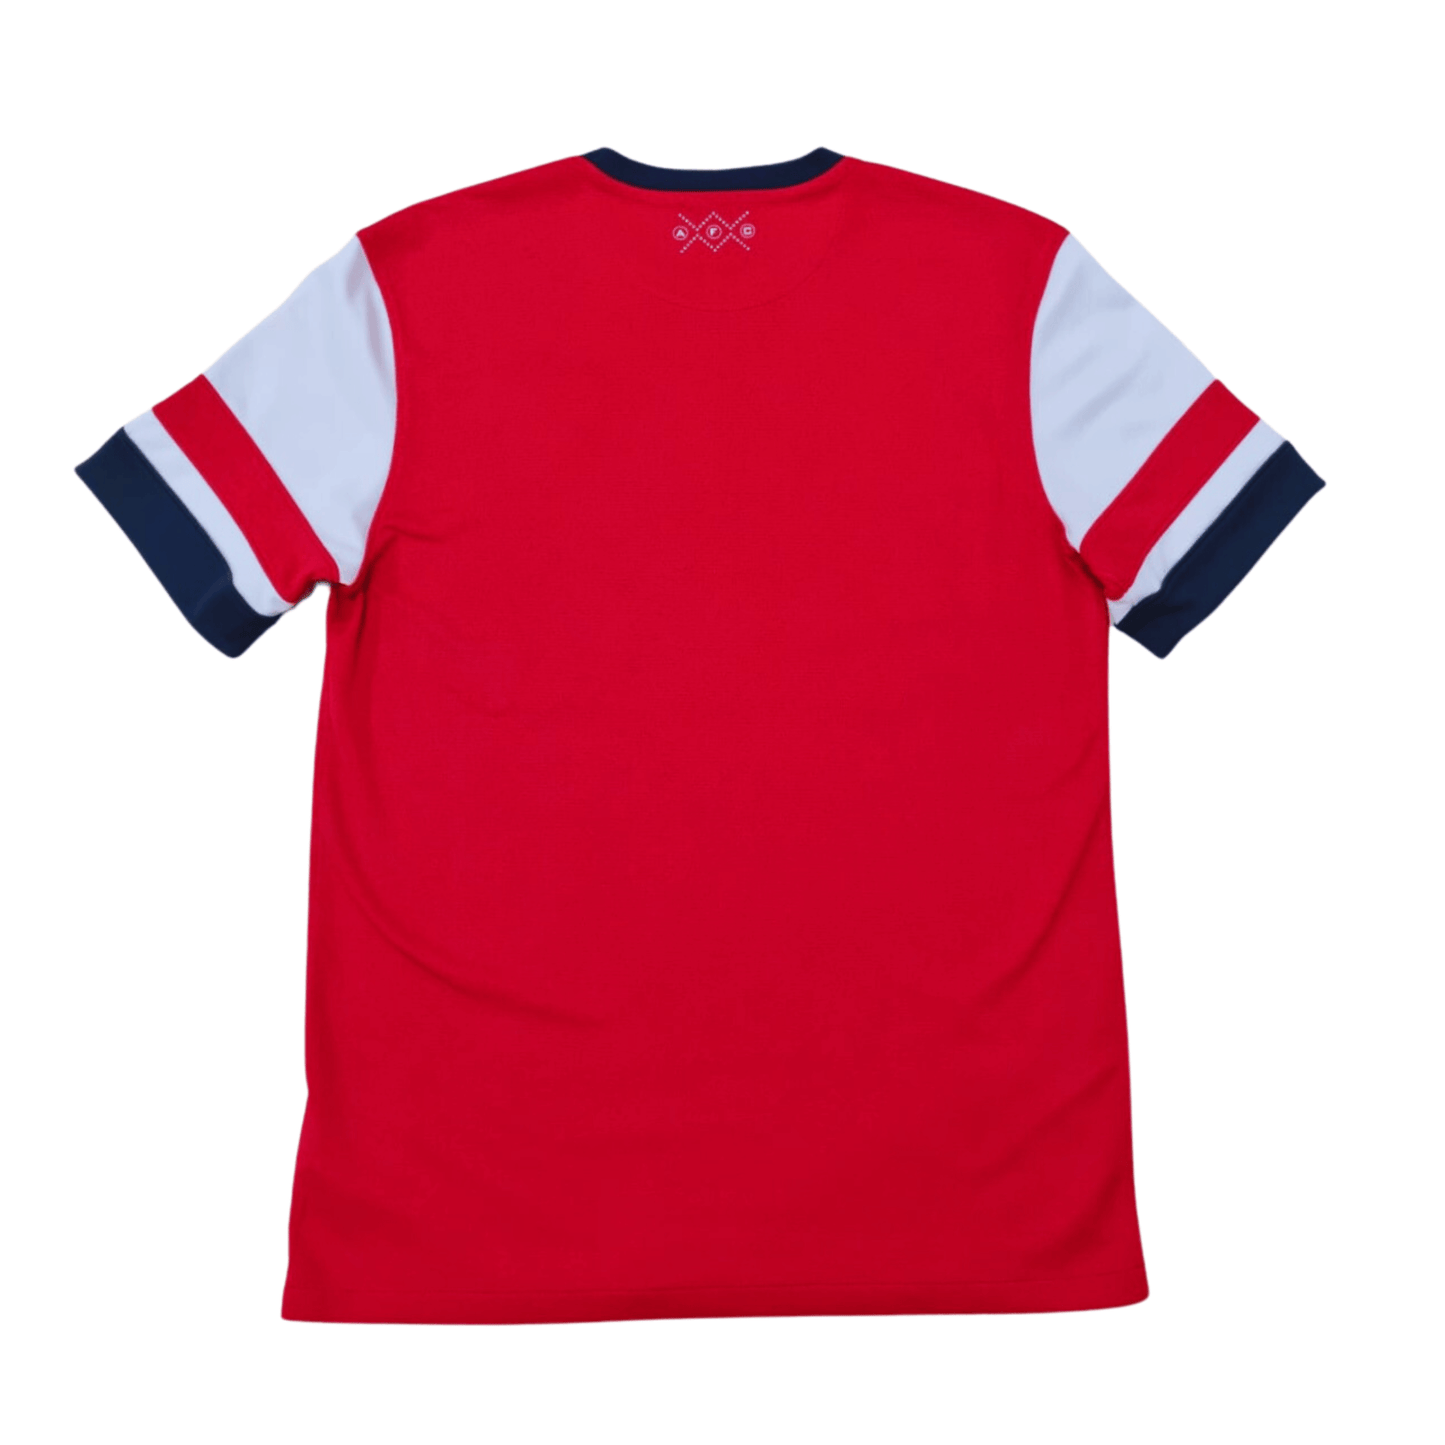 An Arsenal 2013/14 Home Jersey with navy and white stripes in excellent condition.